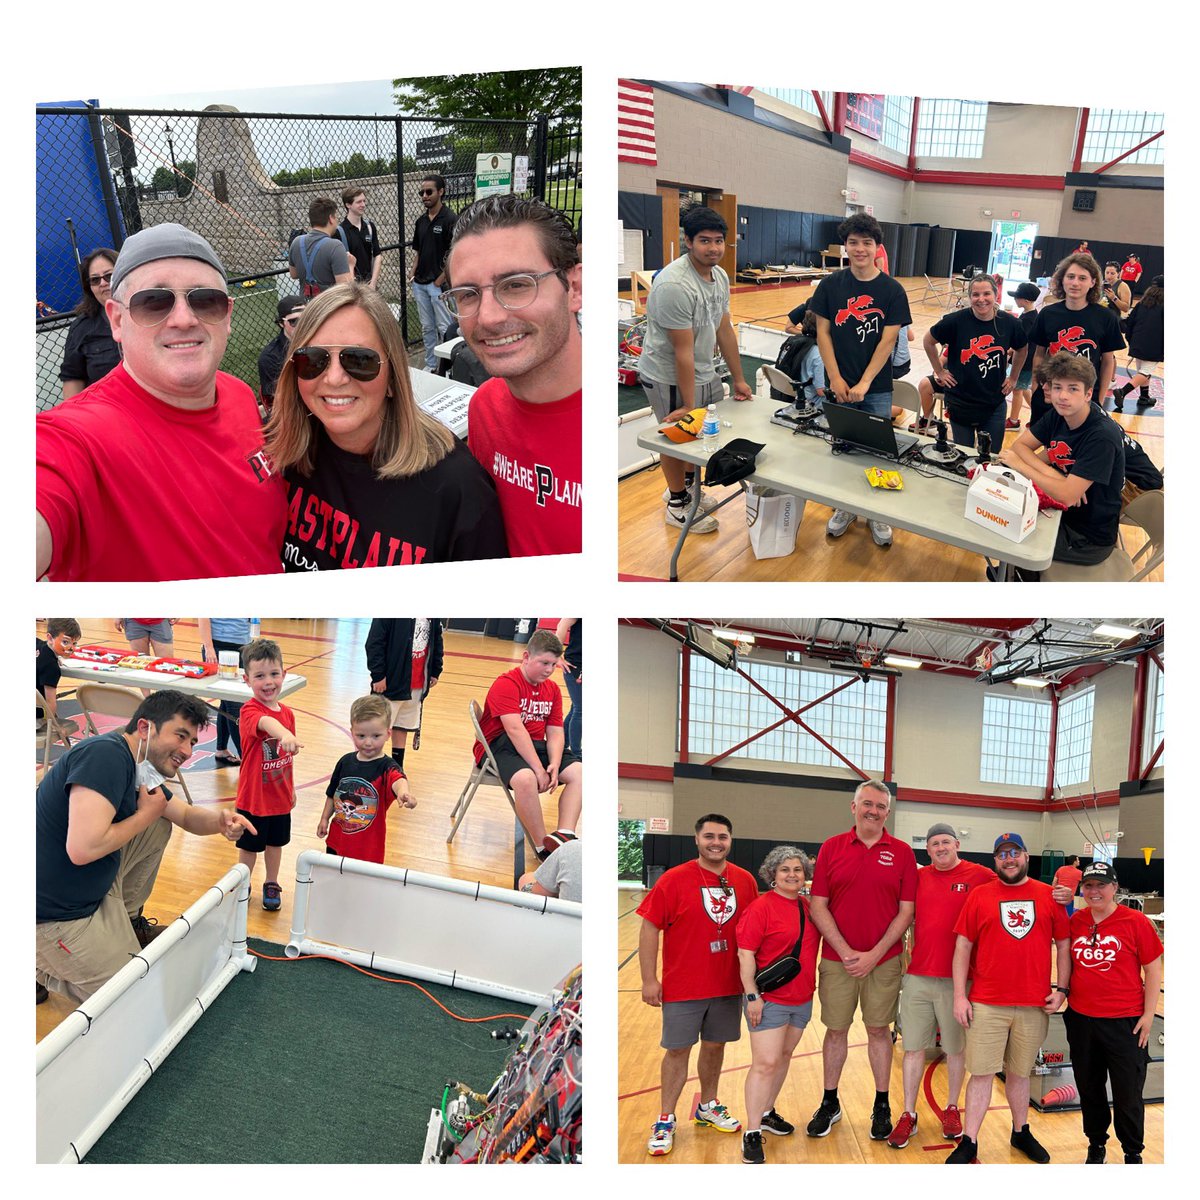 The Pride was alive today at the Brian Moore Activity Center. The PFT came out with their clubs. The PFT also raffled off baskets for scholarships. A reminder of what a terrific district Plainedge is. Come out and support the budget this Tuesday, May 16 in the High School gym.